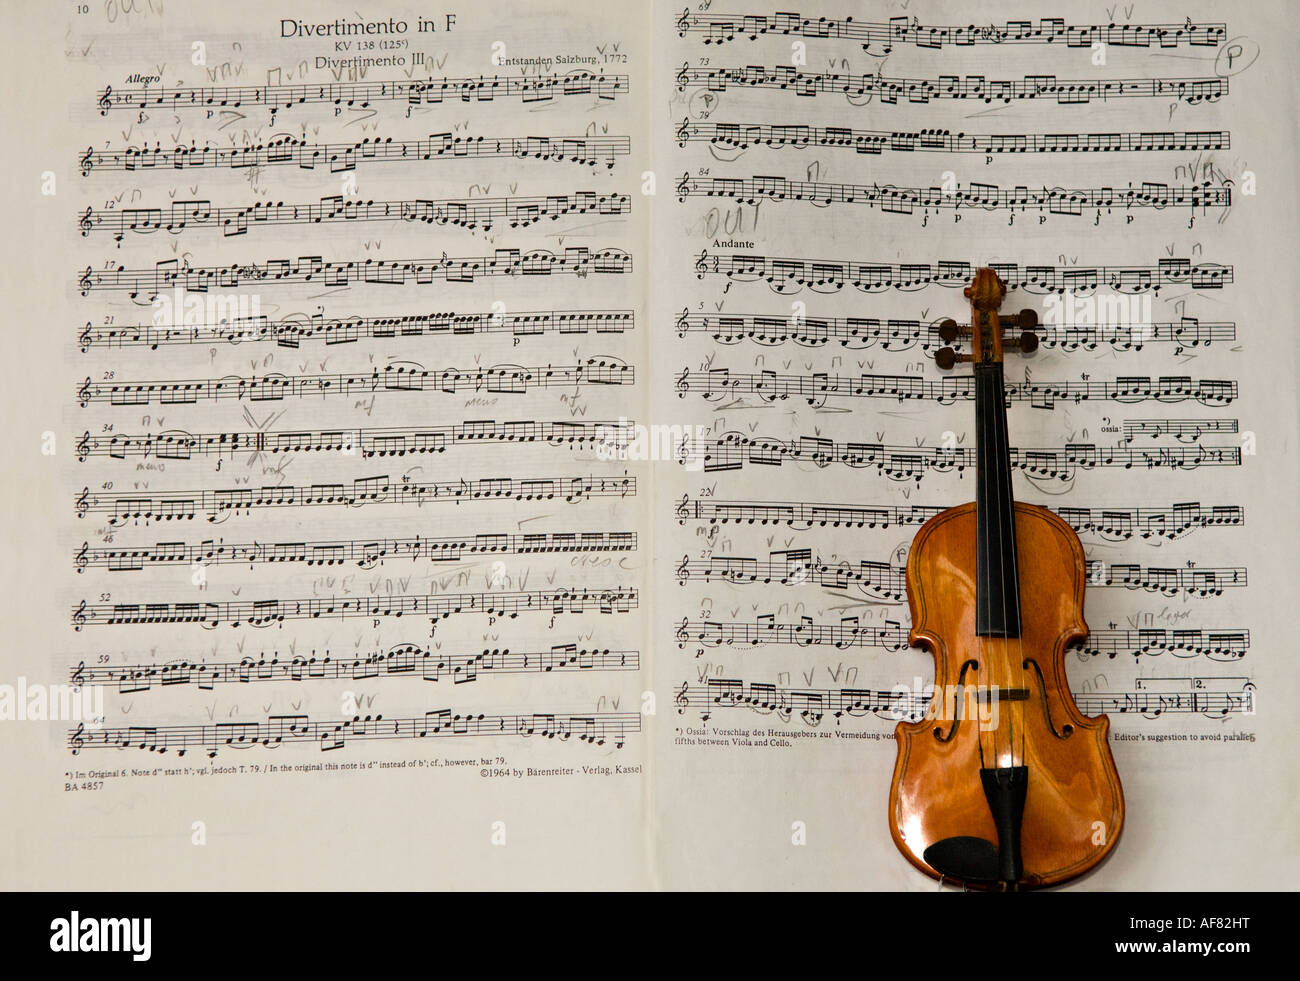 Still life: 1 miniature violin placed on a score (Divertimento in F major, K.138 / 125c (Mozart, Wolfgang Amadeus)) open, annotated in pencil. Stock Photo